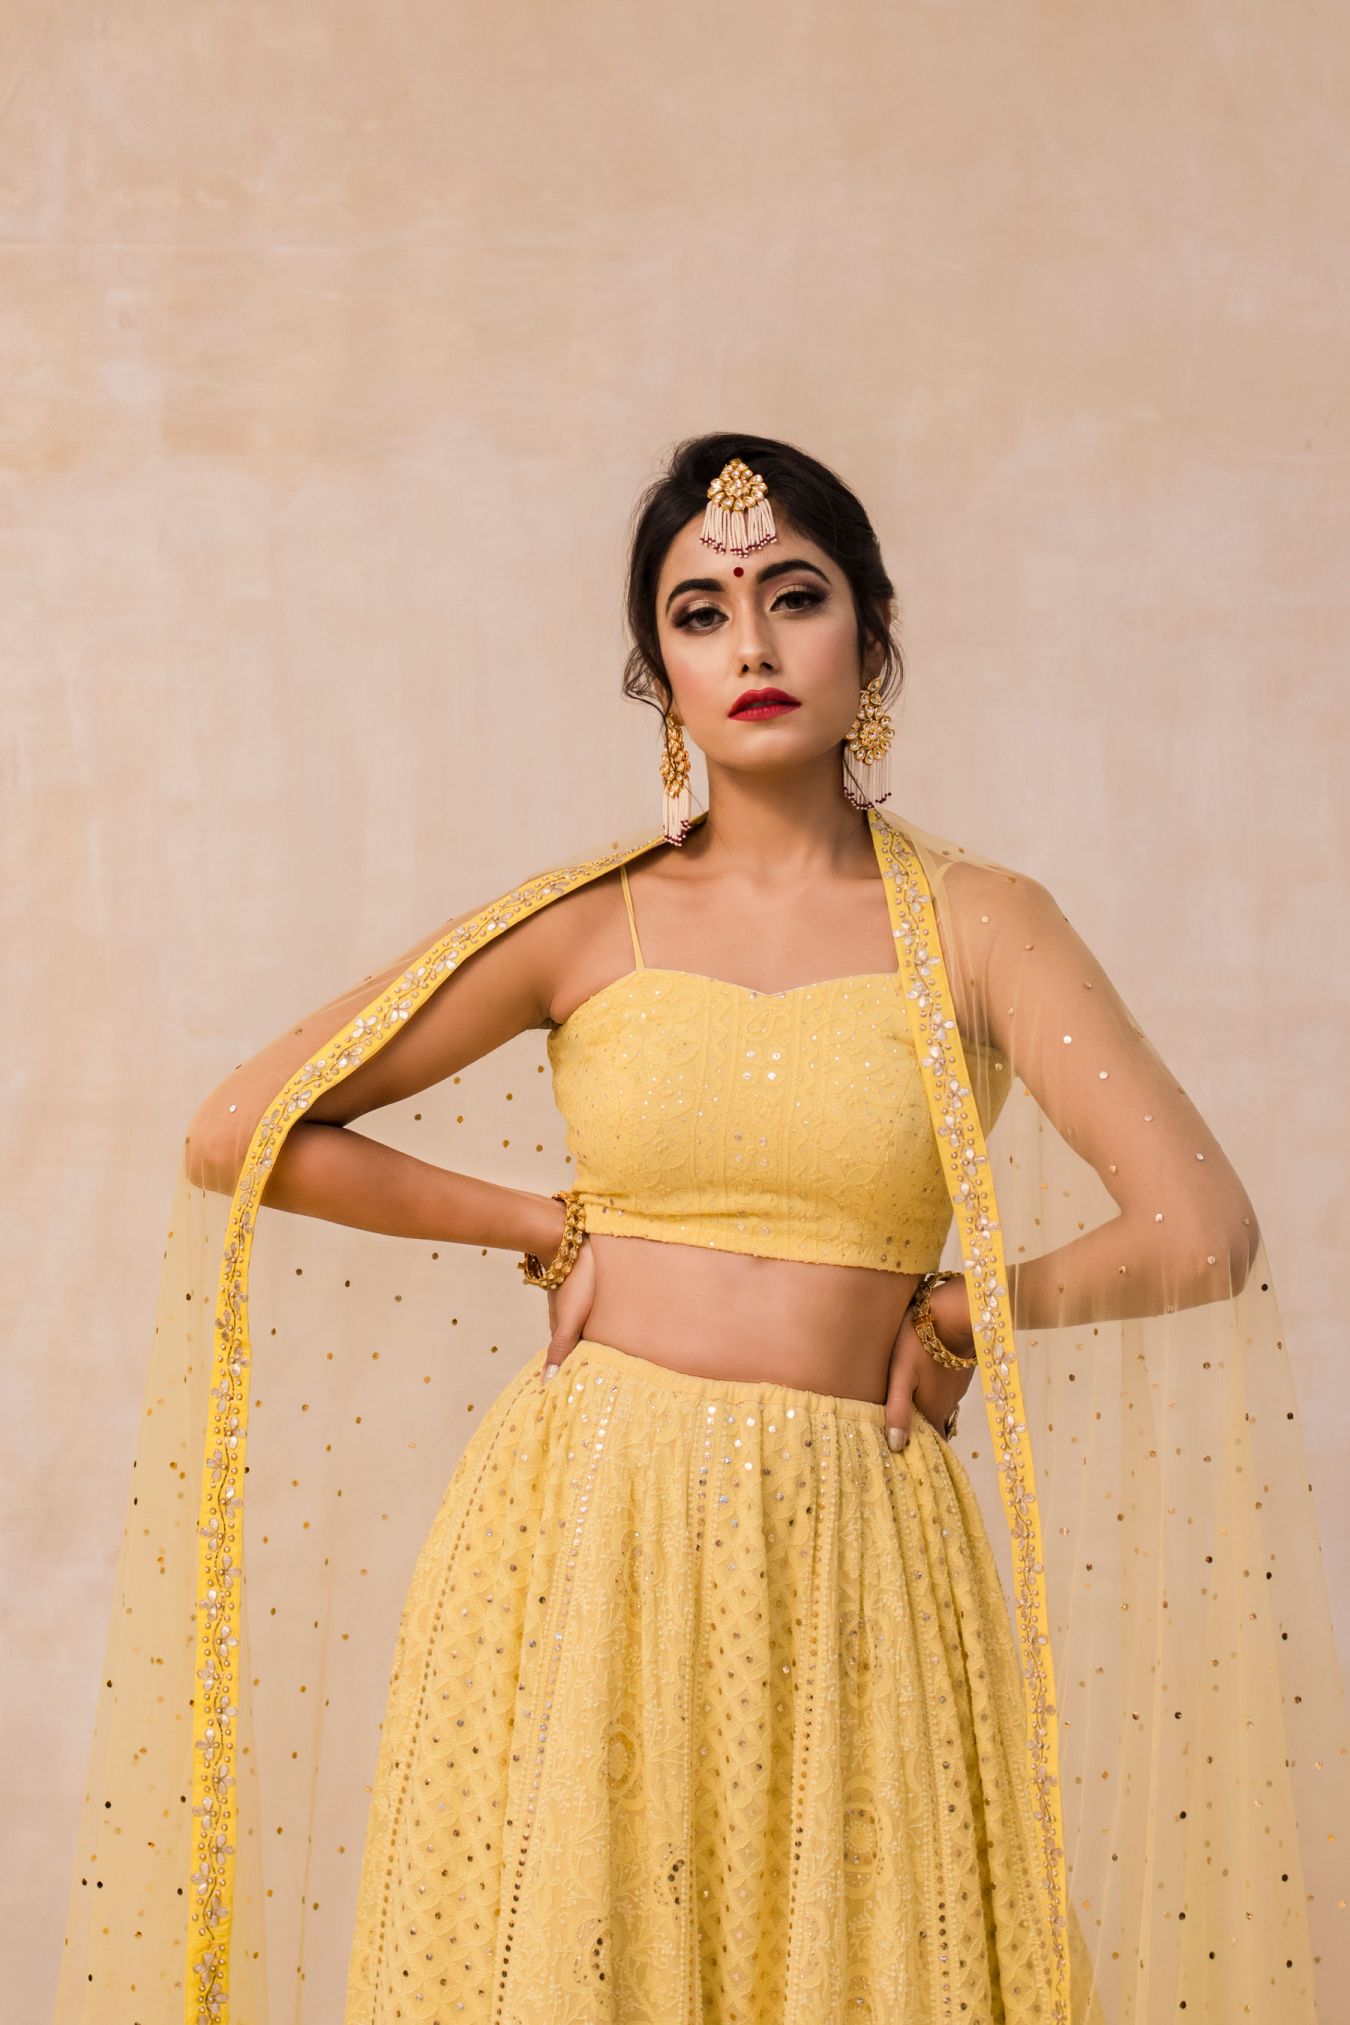 Dreamy and Handcrafted Chikan Mukaish Lehenga Embellished With Zardozi & Gota Patti Work Glimmering in Spectacularly Jazzy Yellow color